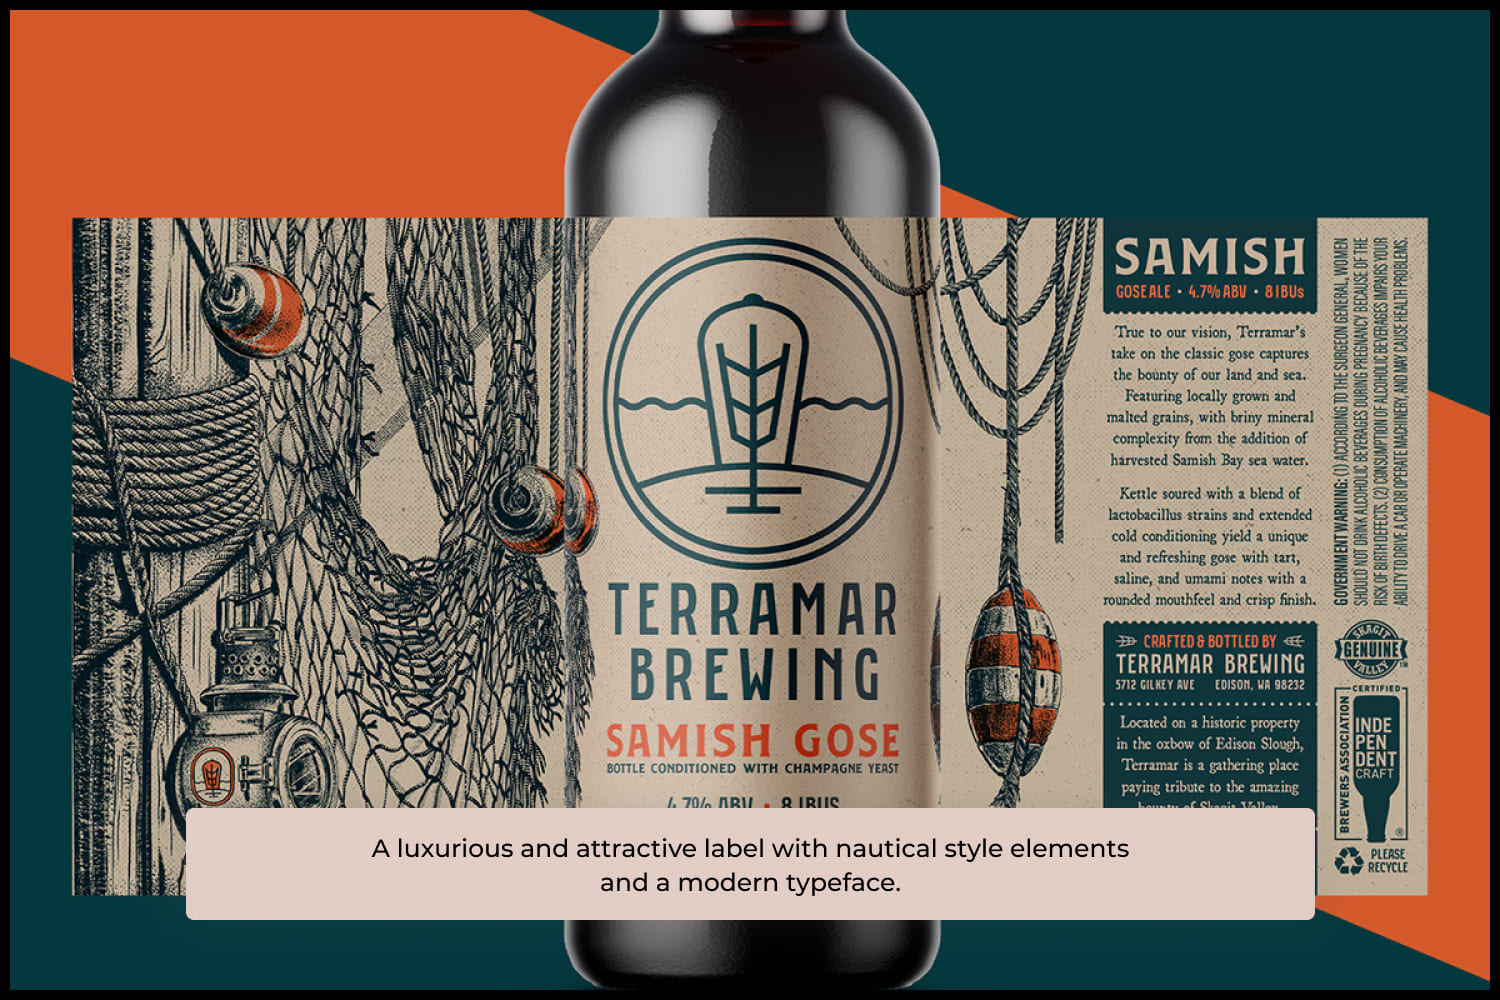 A luxurious and attractive label with nautical style elements and a modern typeface.